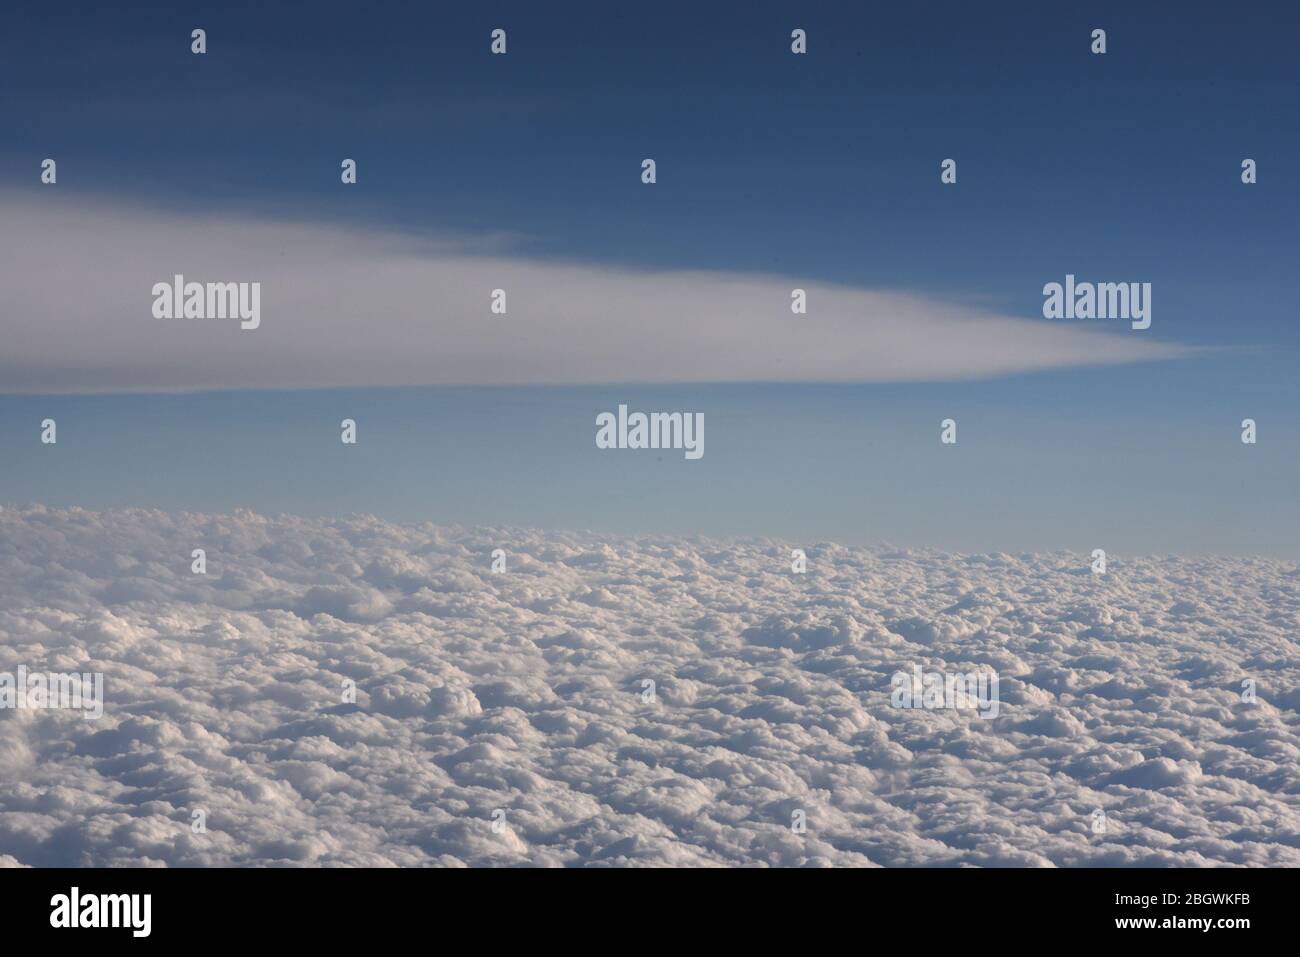 Horizontal image of a view of cloud formations from above, looking down from an airplane Stock Photo